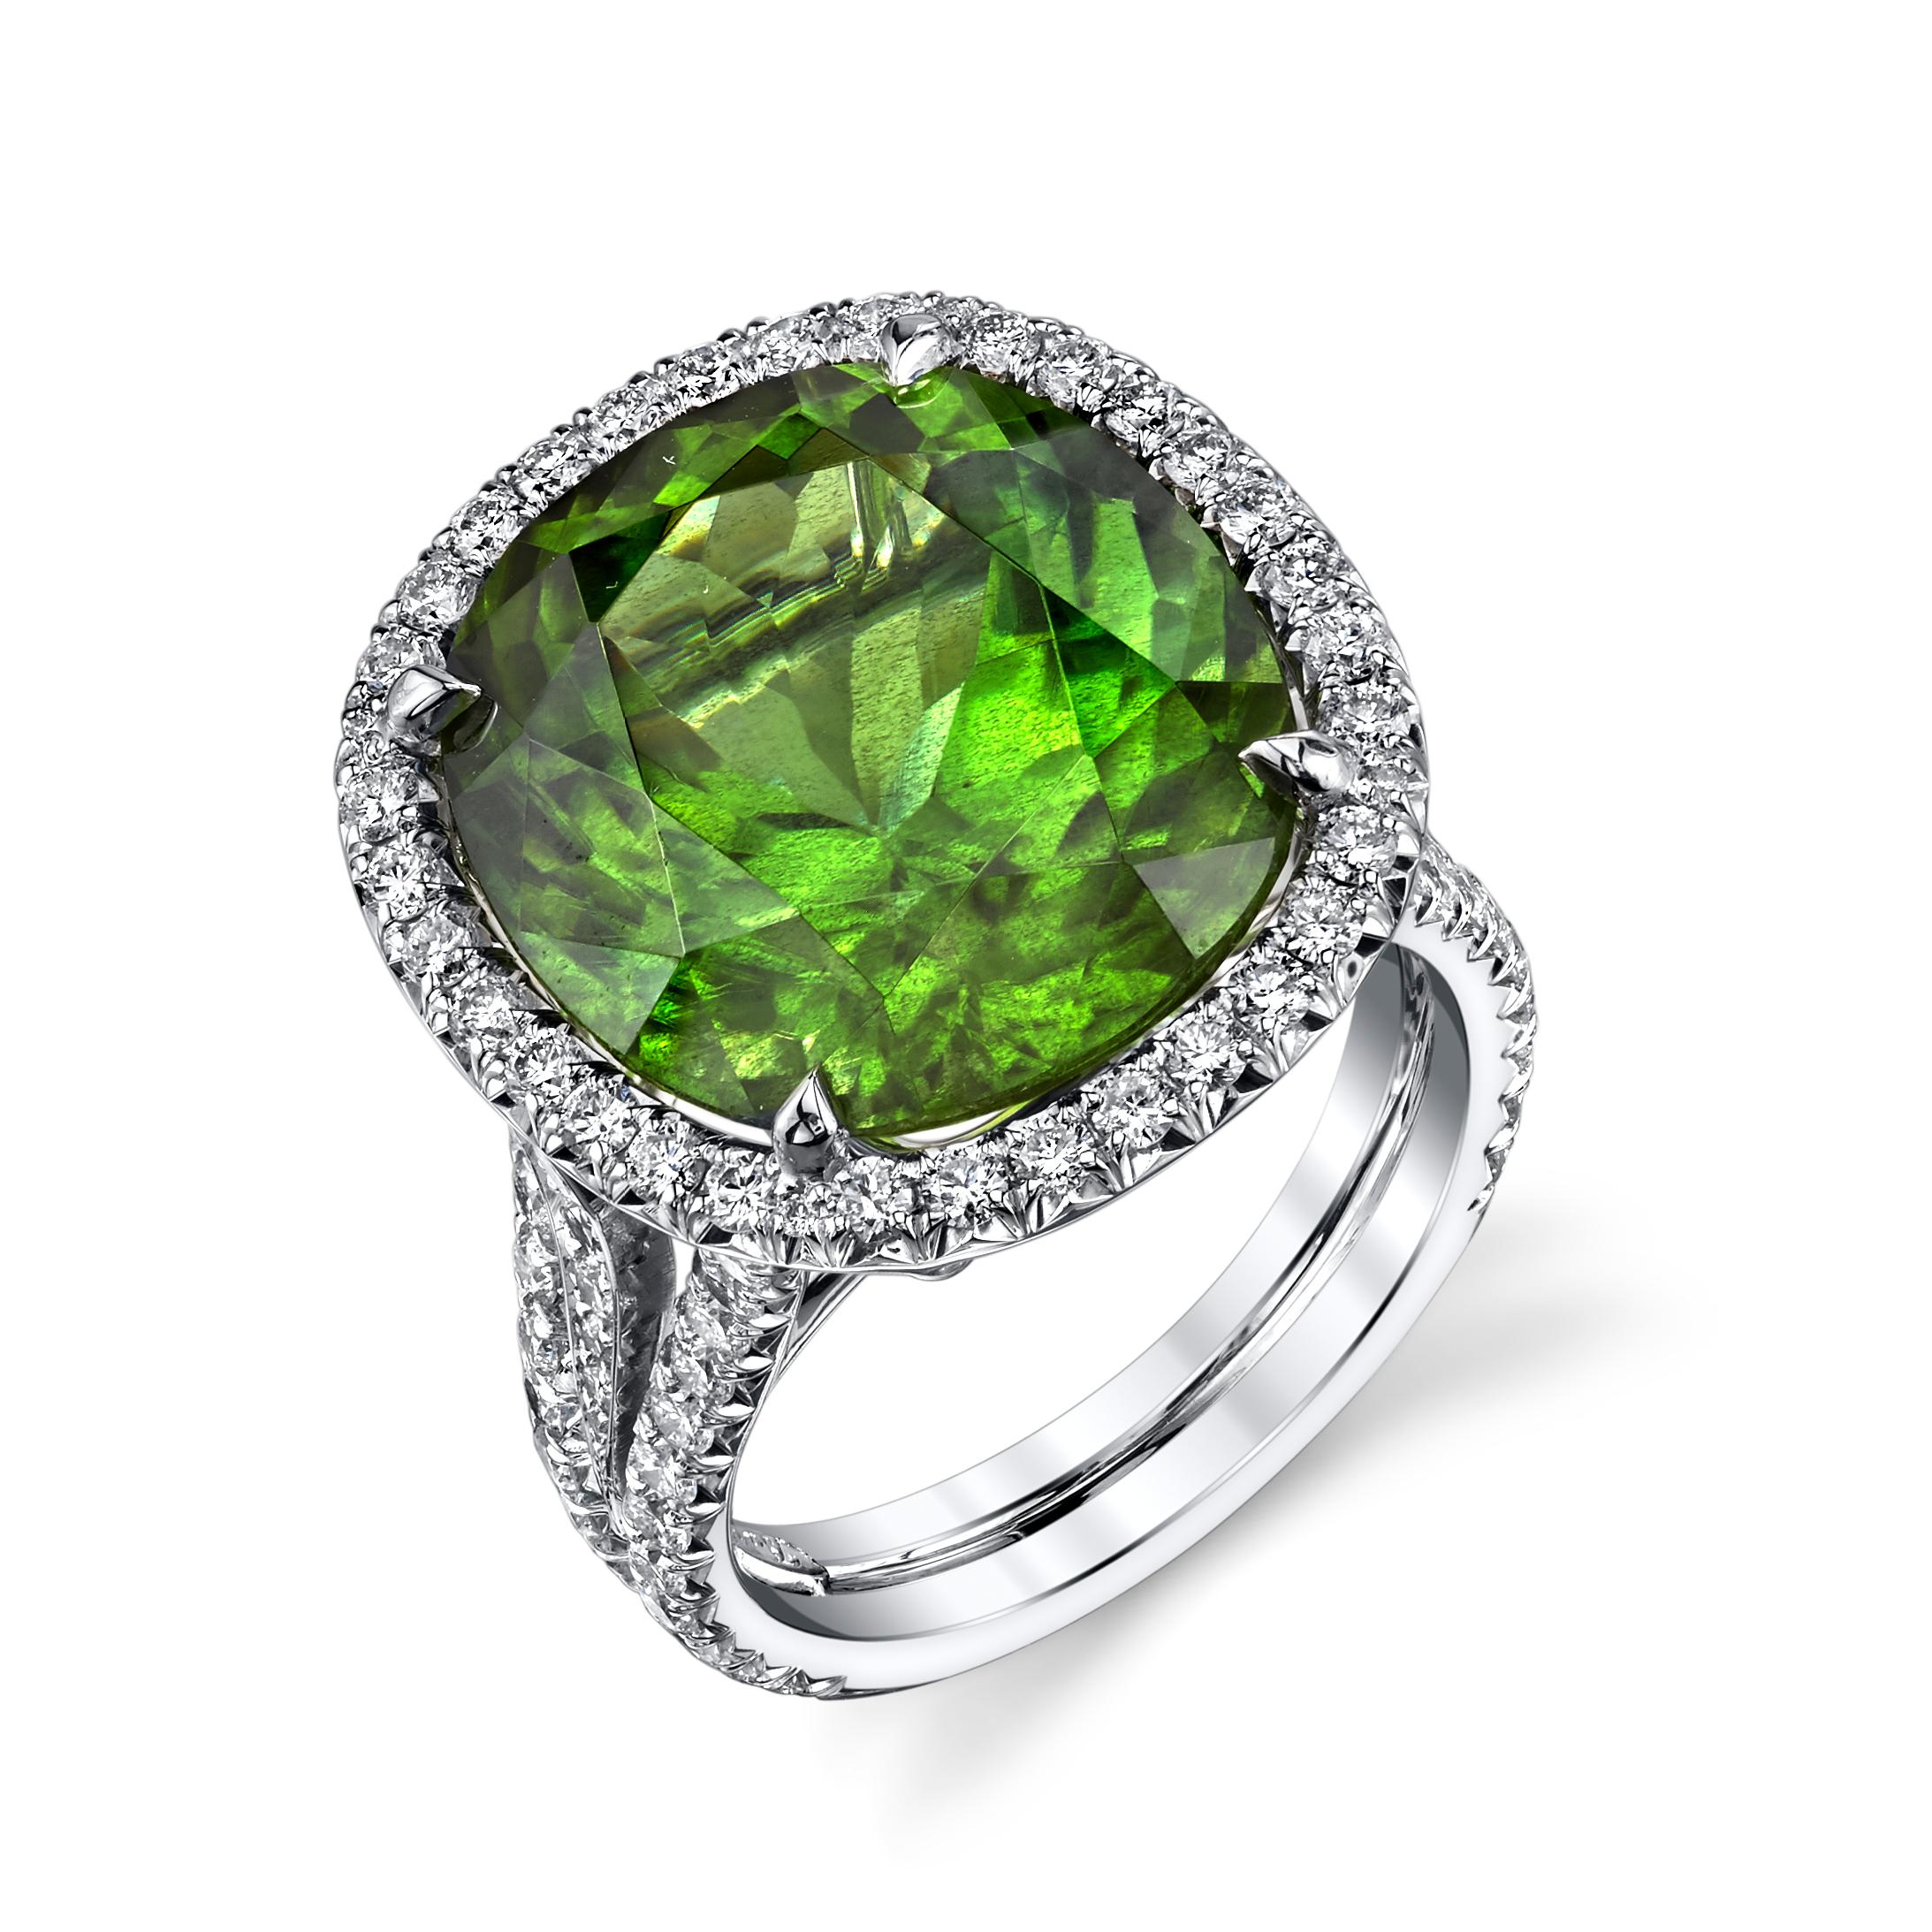 16.16ct. Burmese Oval Peridot Ring, accented with 1.15ct. of diamonds around the center stone. This design is set in 18 karat white gold.
Peridot is considered to be the birthstone for August and is the stone traditionally given in celebration of